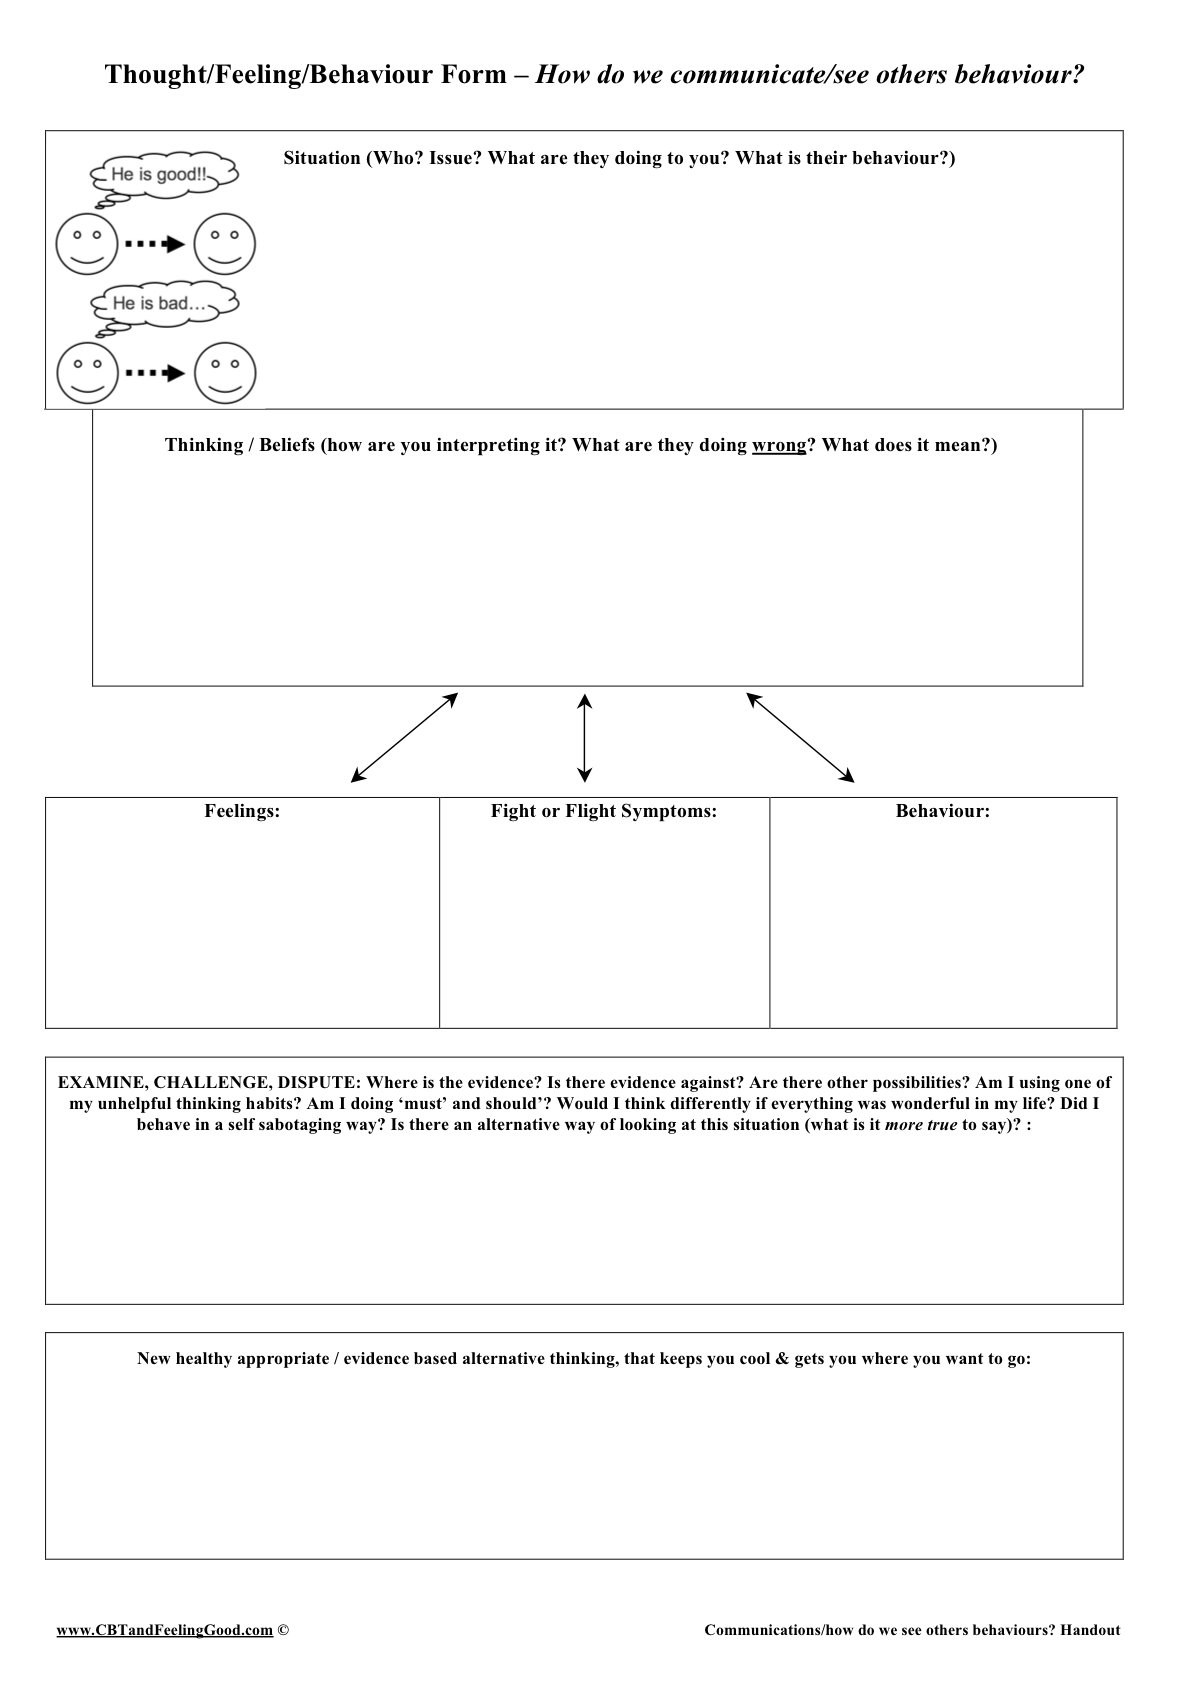 Cbt Dublin Ireland Worksheet – The Thoughtfeelingbehaviour Comms Within Cbt For Social Anxiety Worksheets